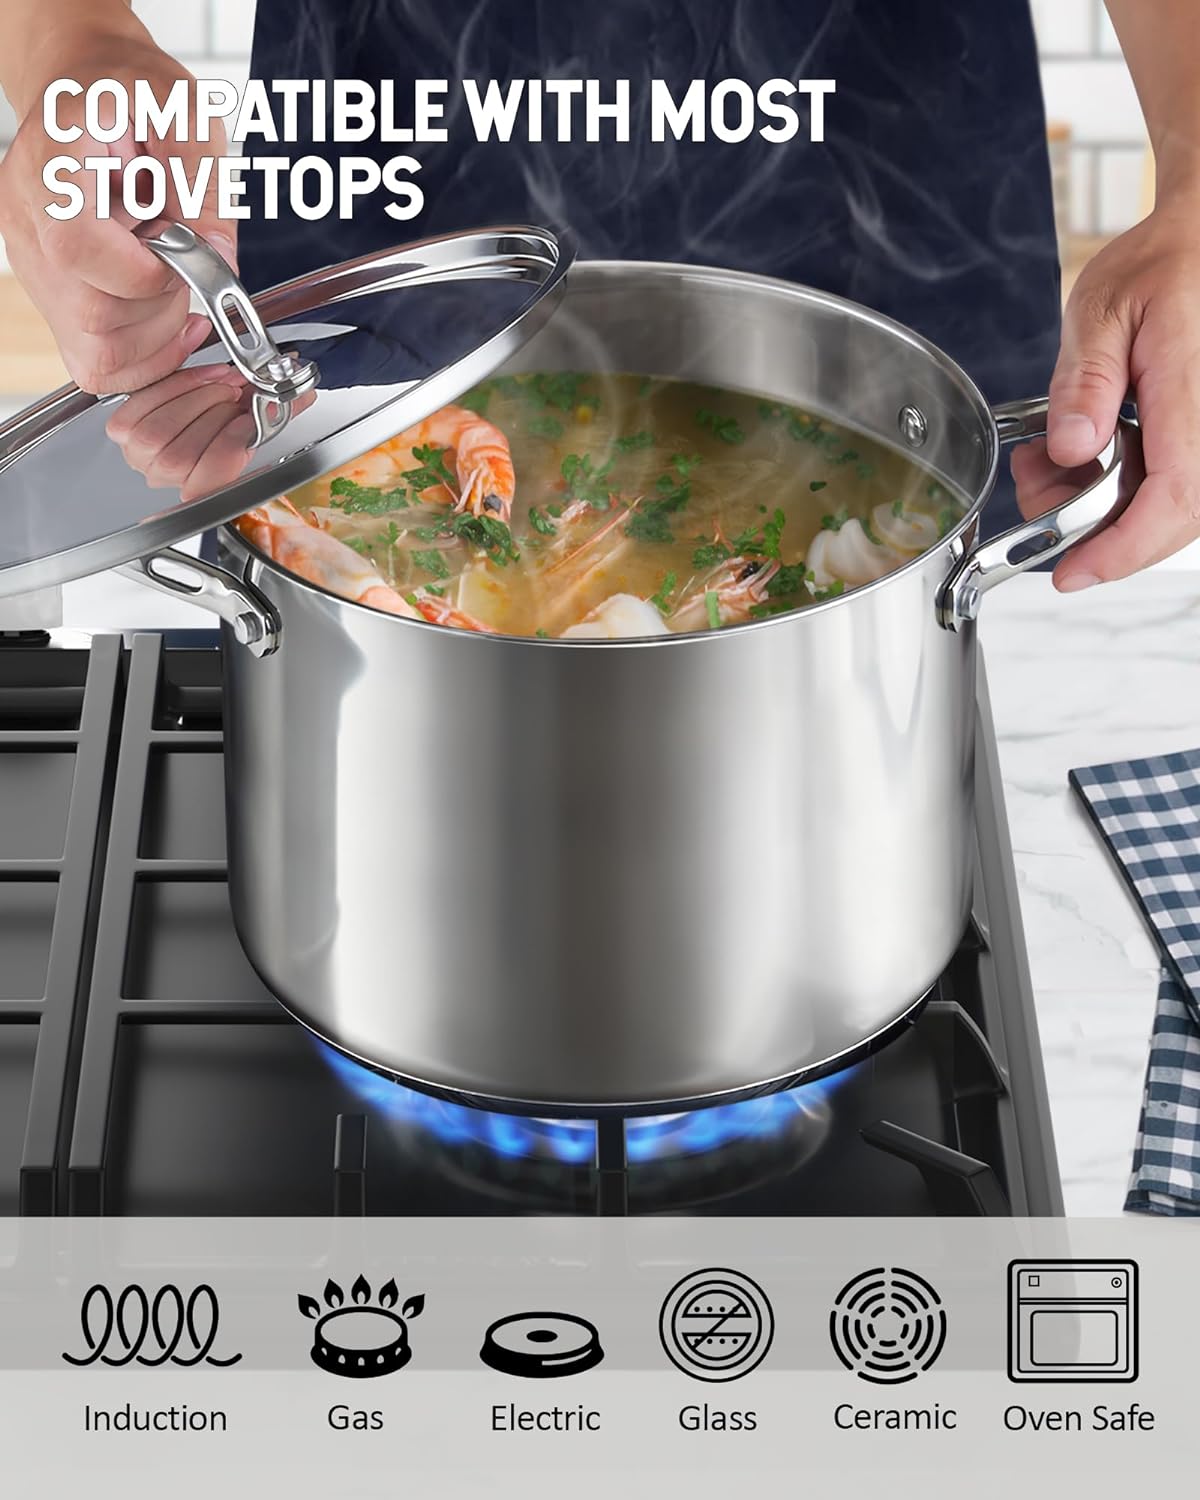 Cooks Standard 8 Quart Classic Stainless Steel Stockpot with Lid